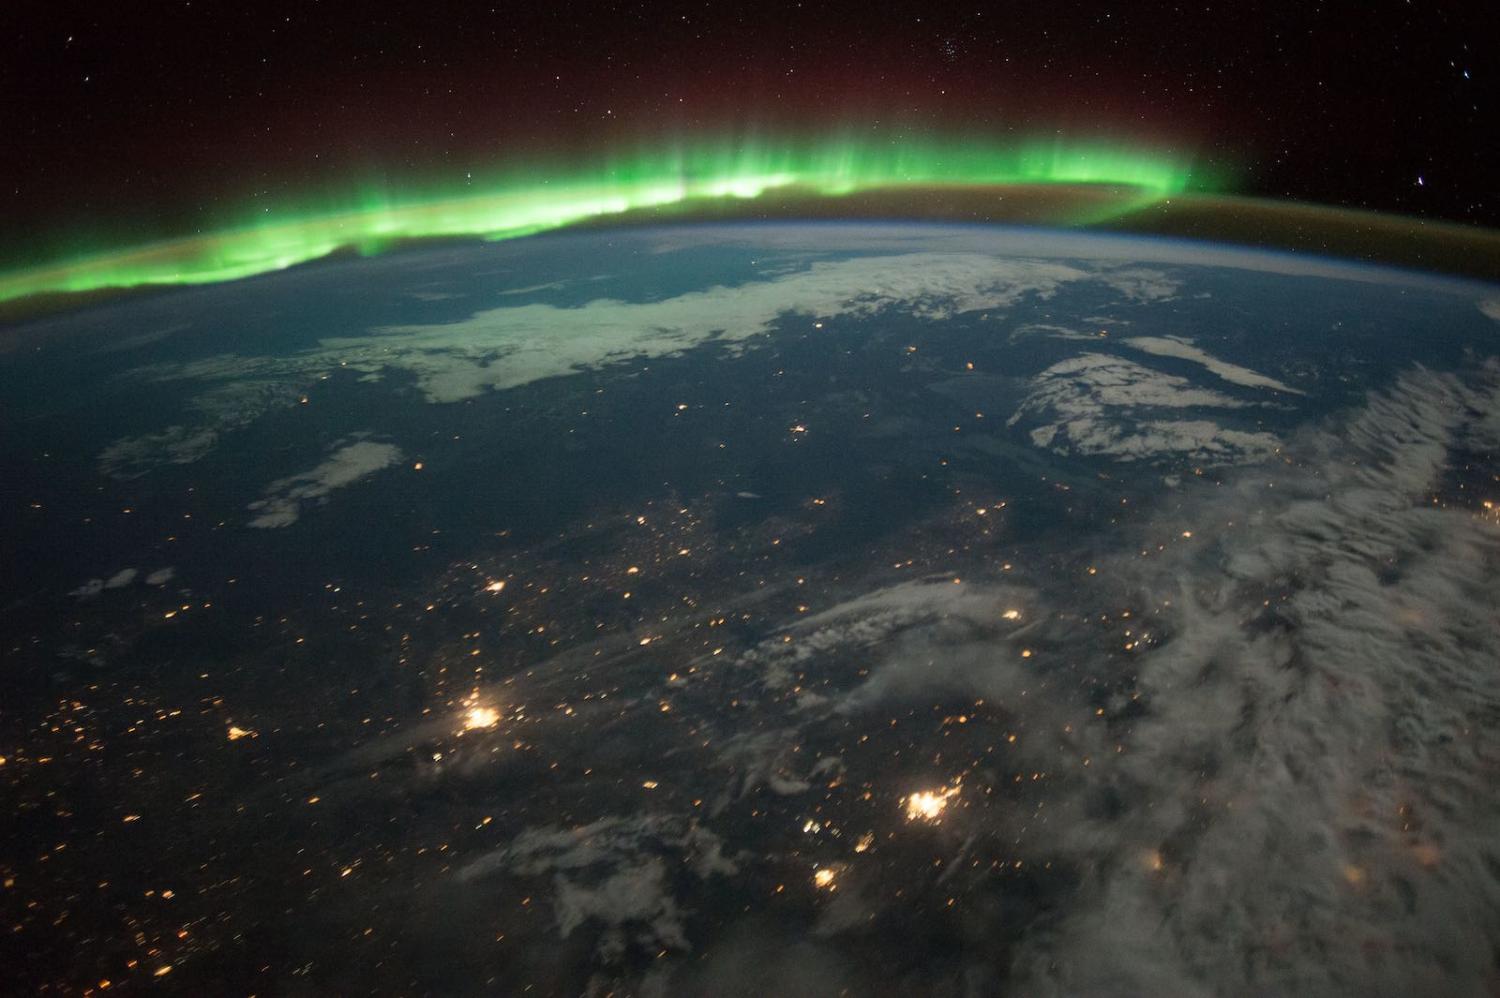 The Aurora Borealis seen from the International Space Center in 2016 (NASA/Flickr)